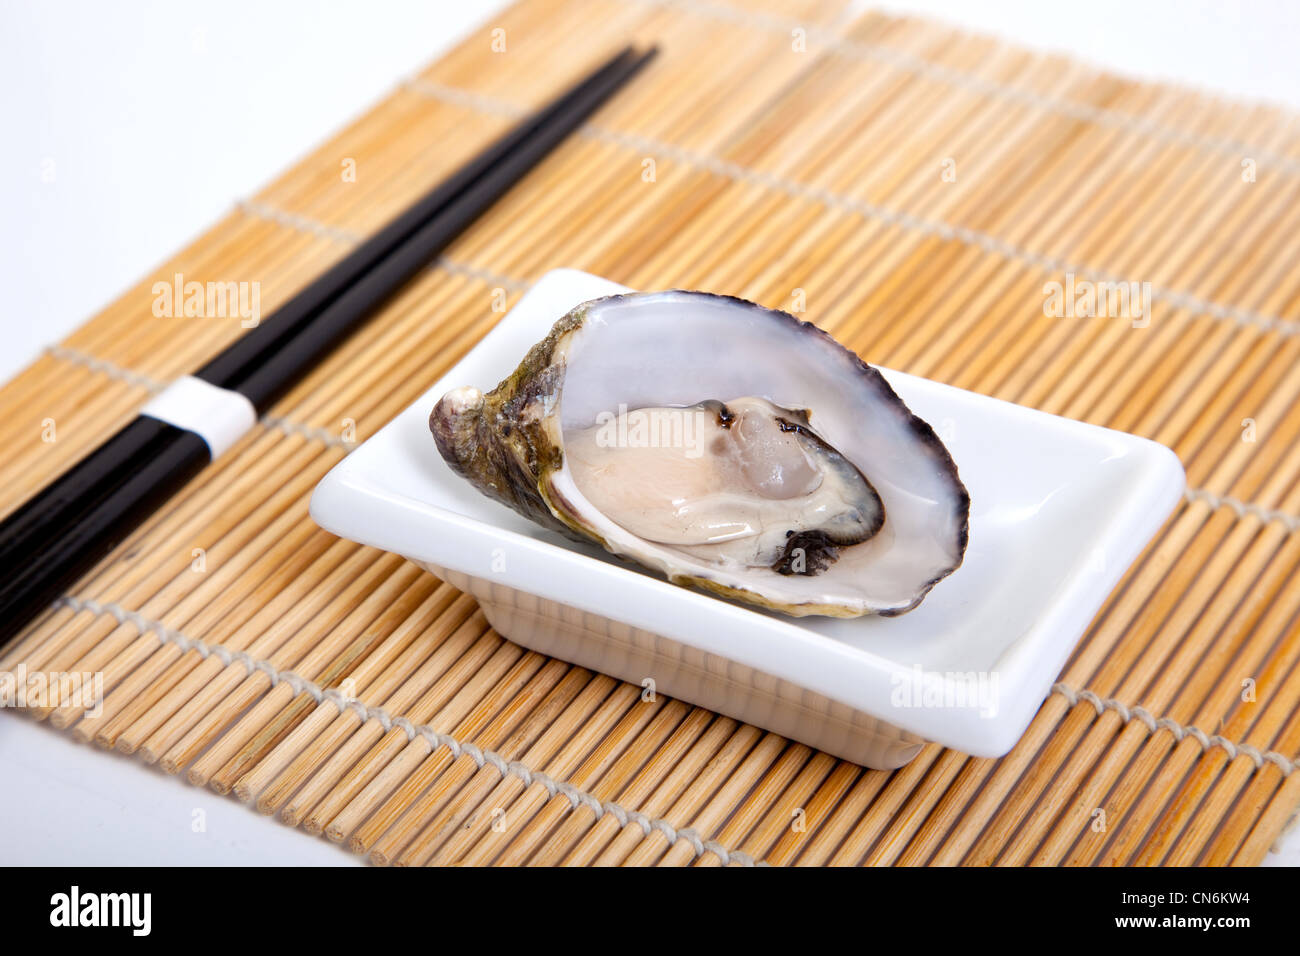 Oyster on a plate Stock Photo